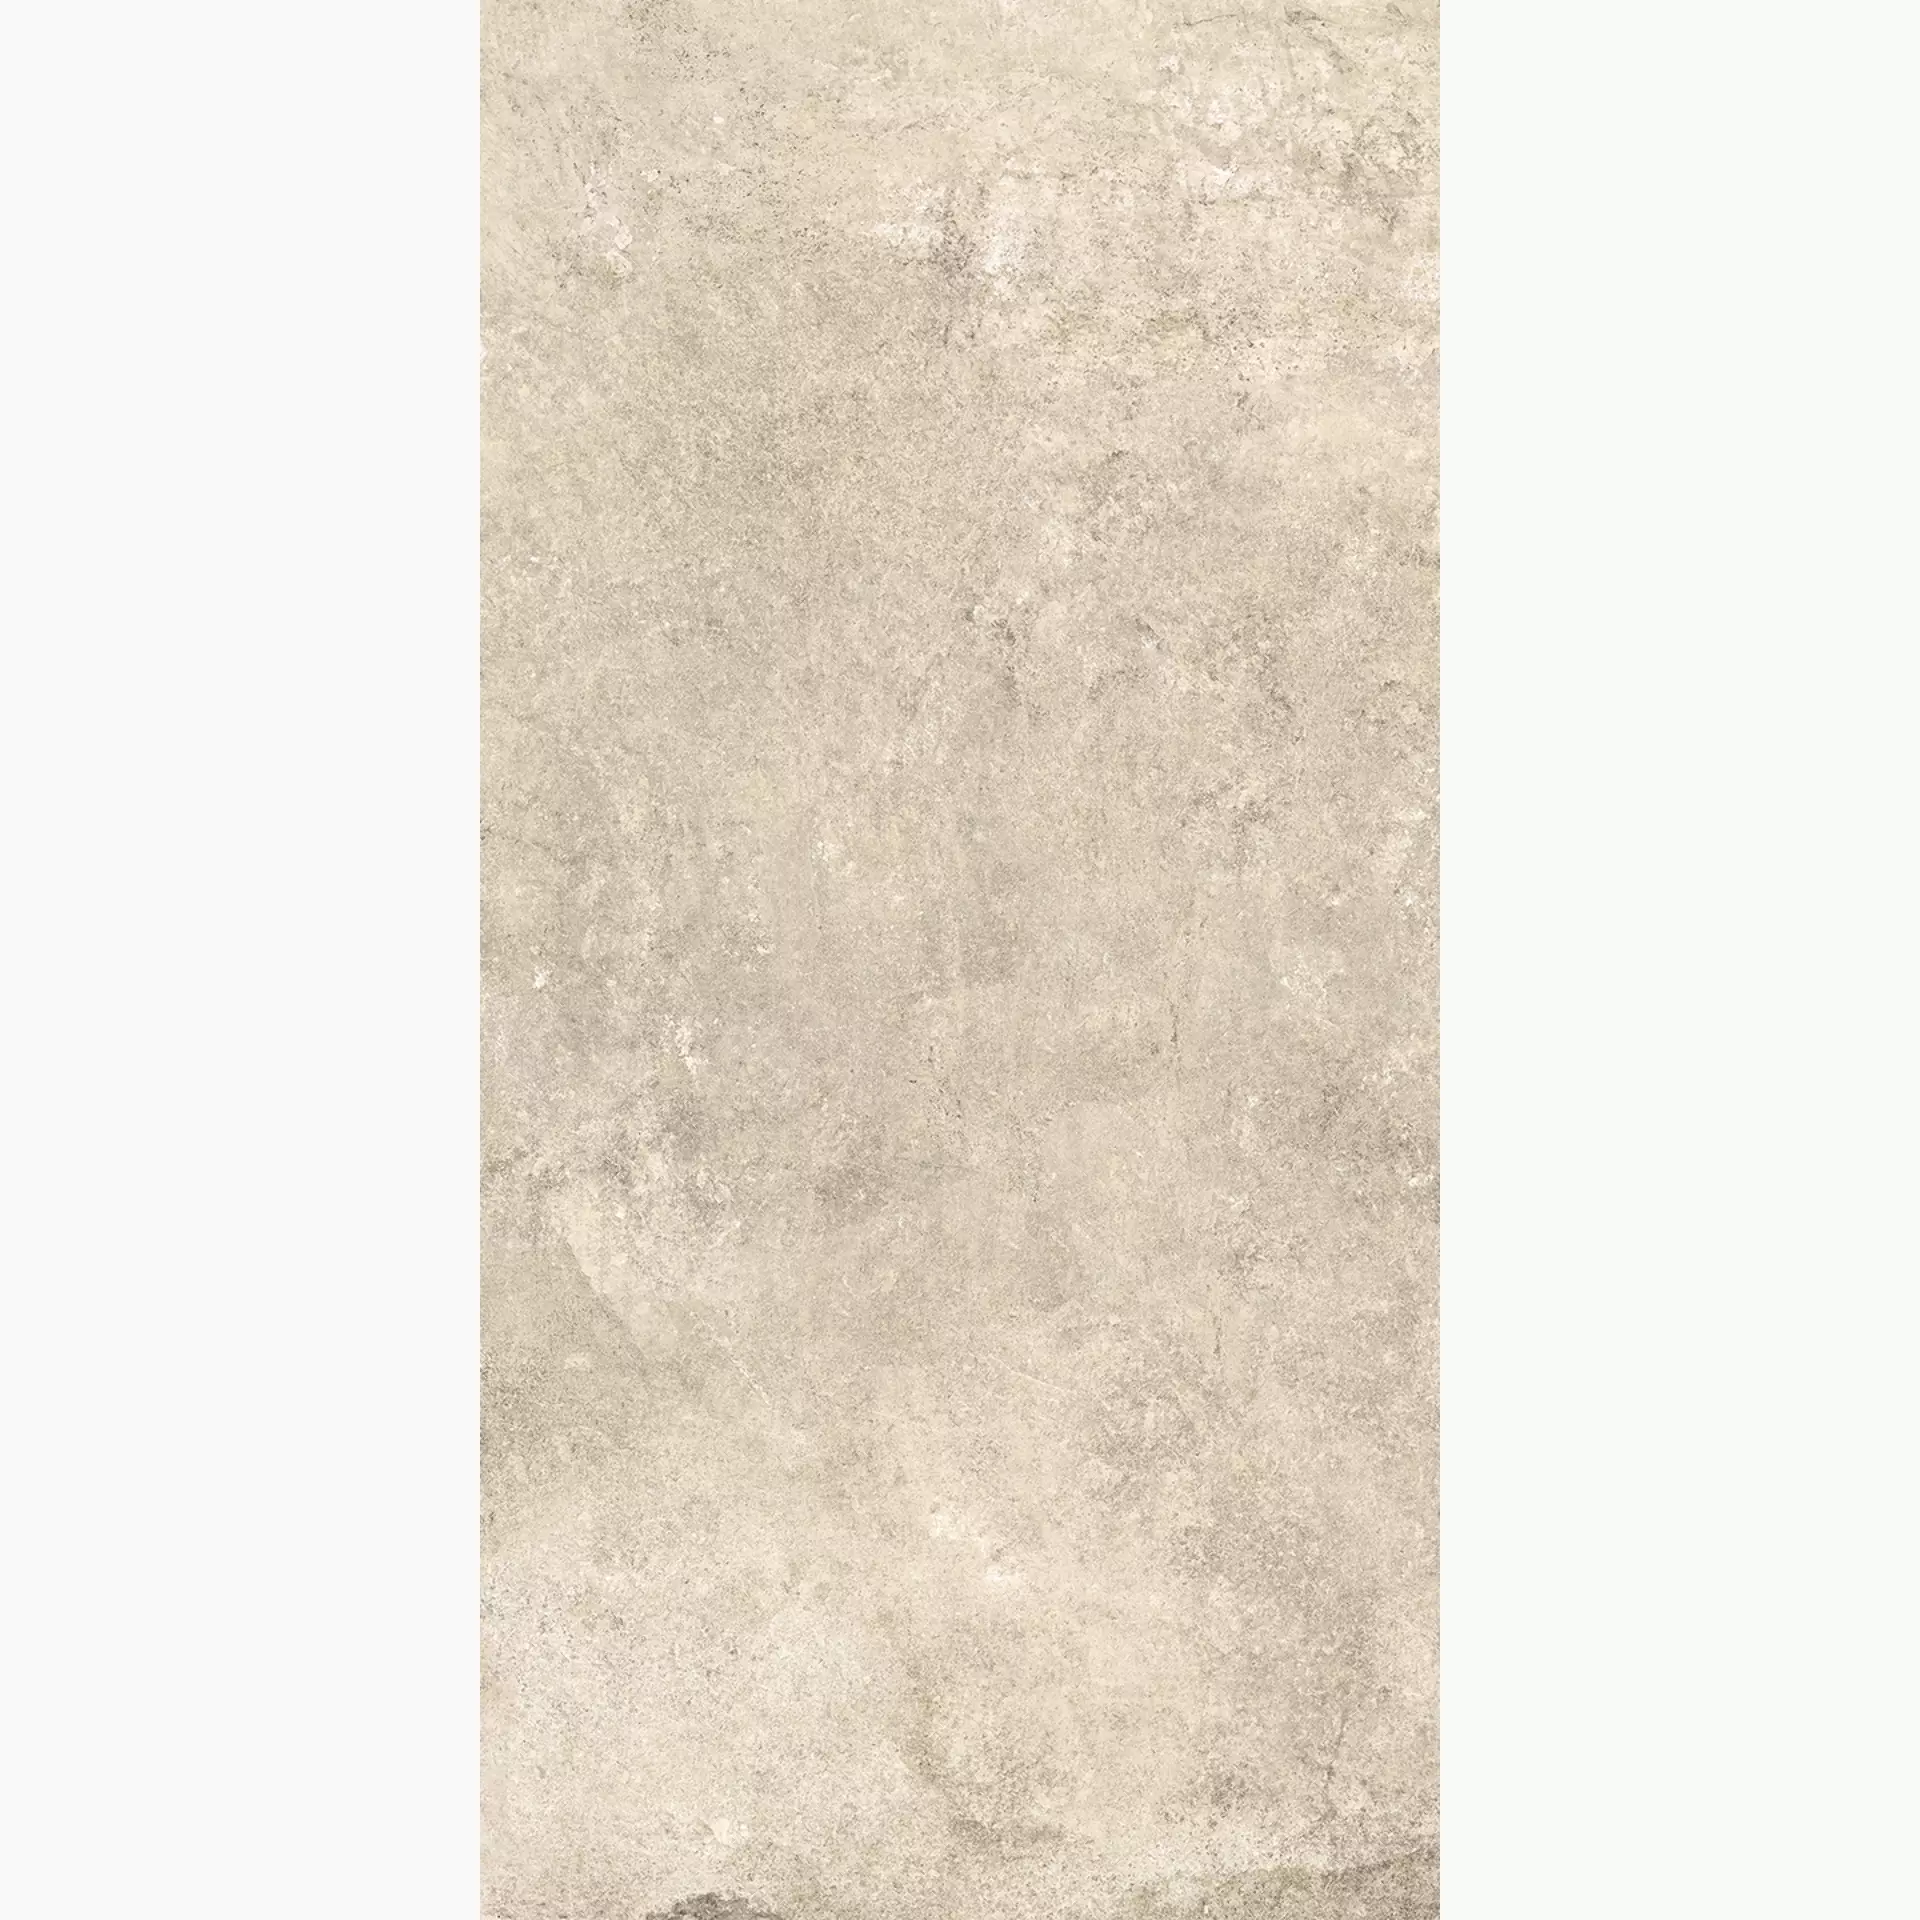 Fondovalle Reframe Ivory Natural REF089 60x120cm rectified 8,5mm